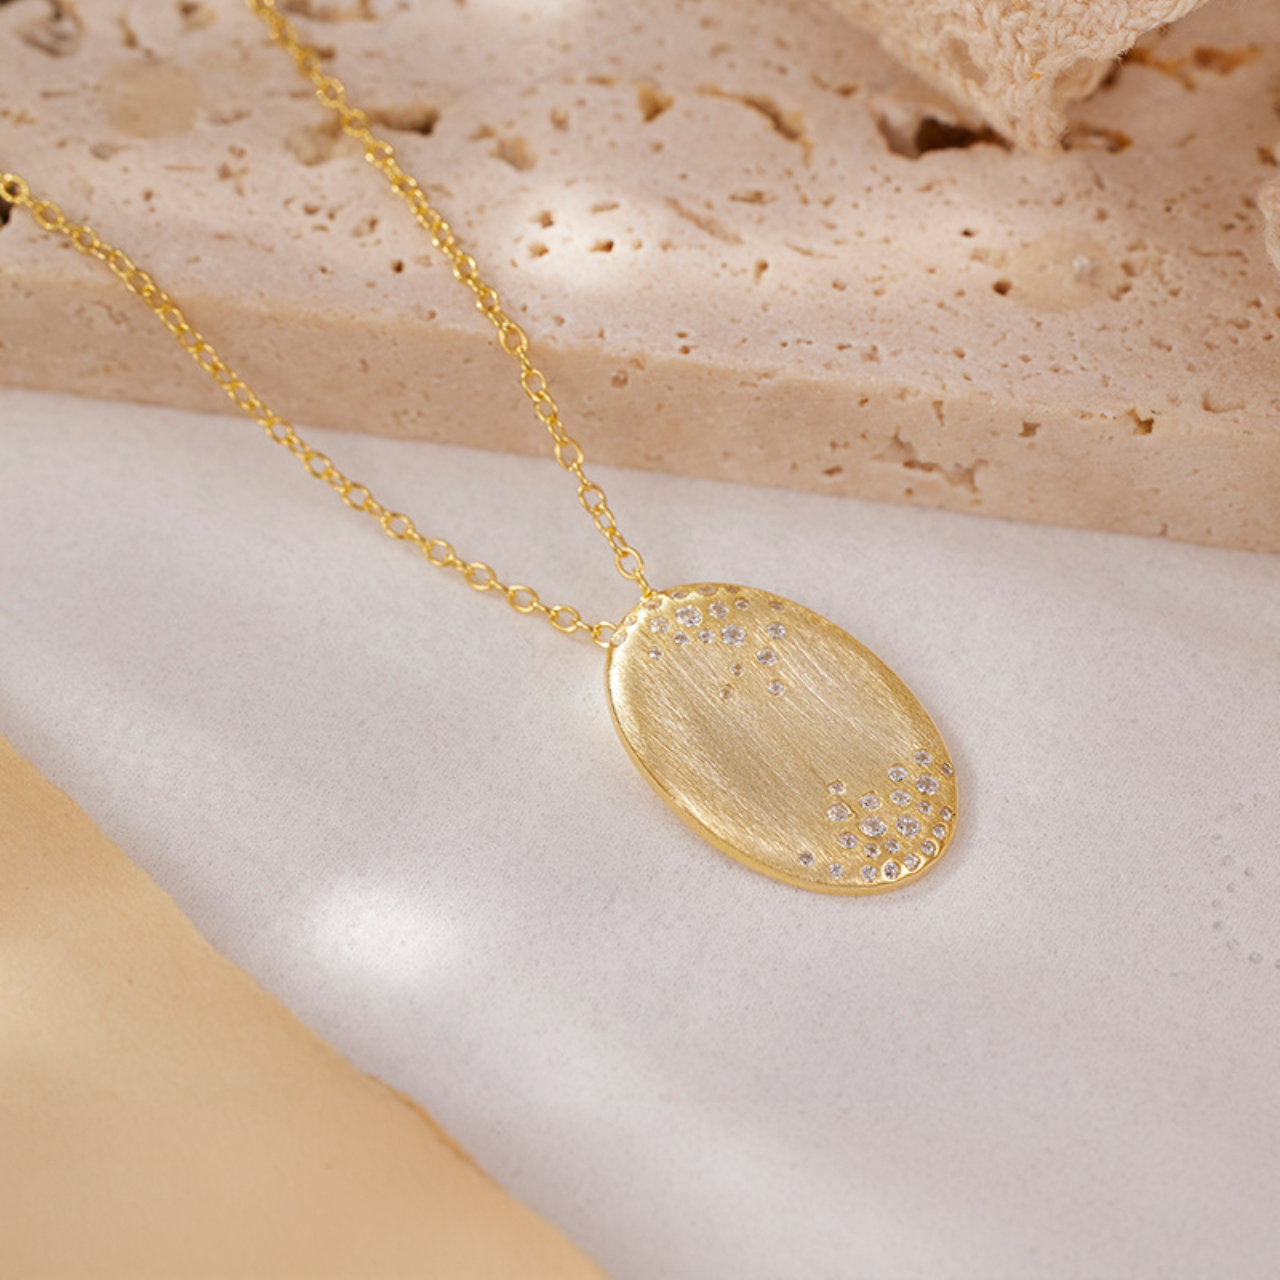 Oval pendant gold necklace